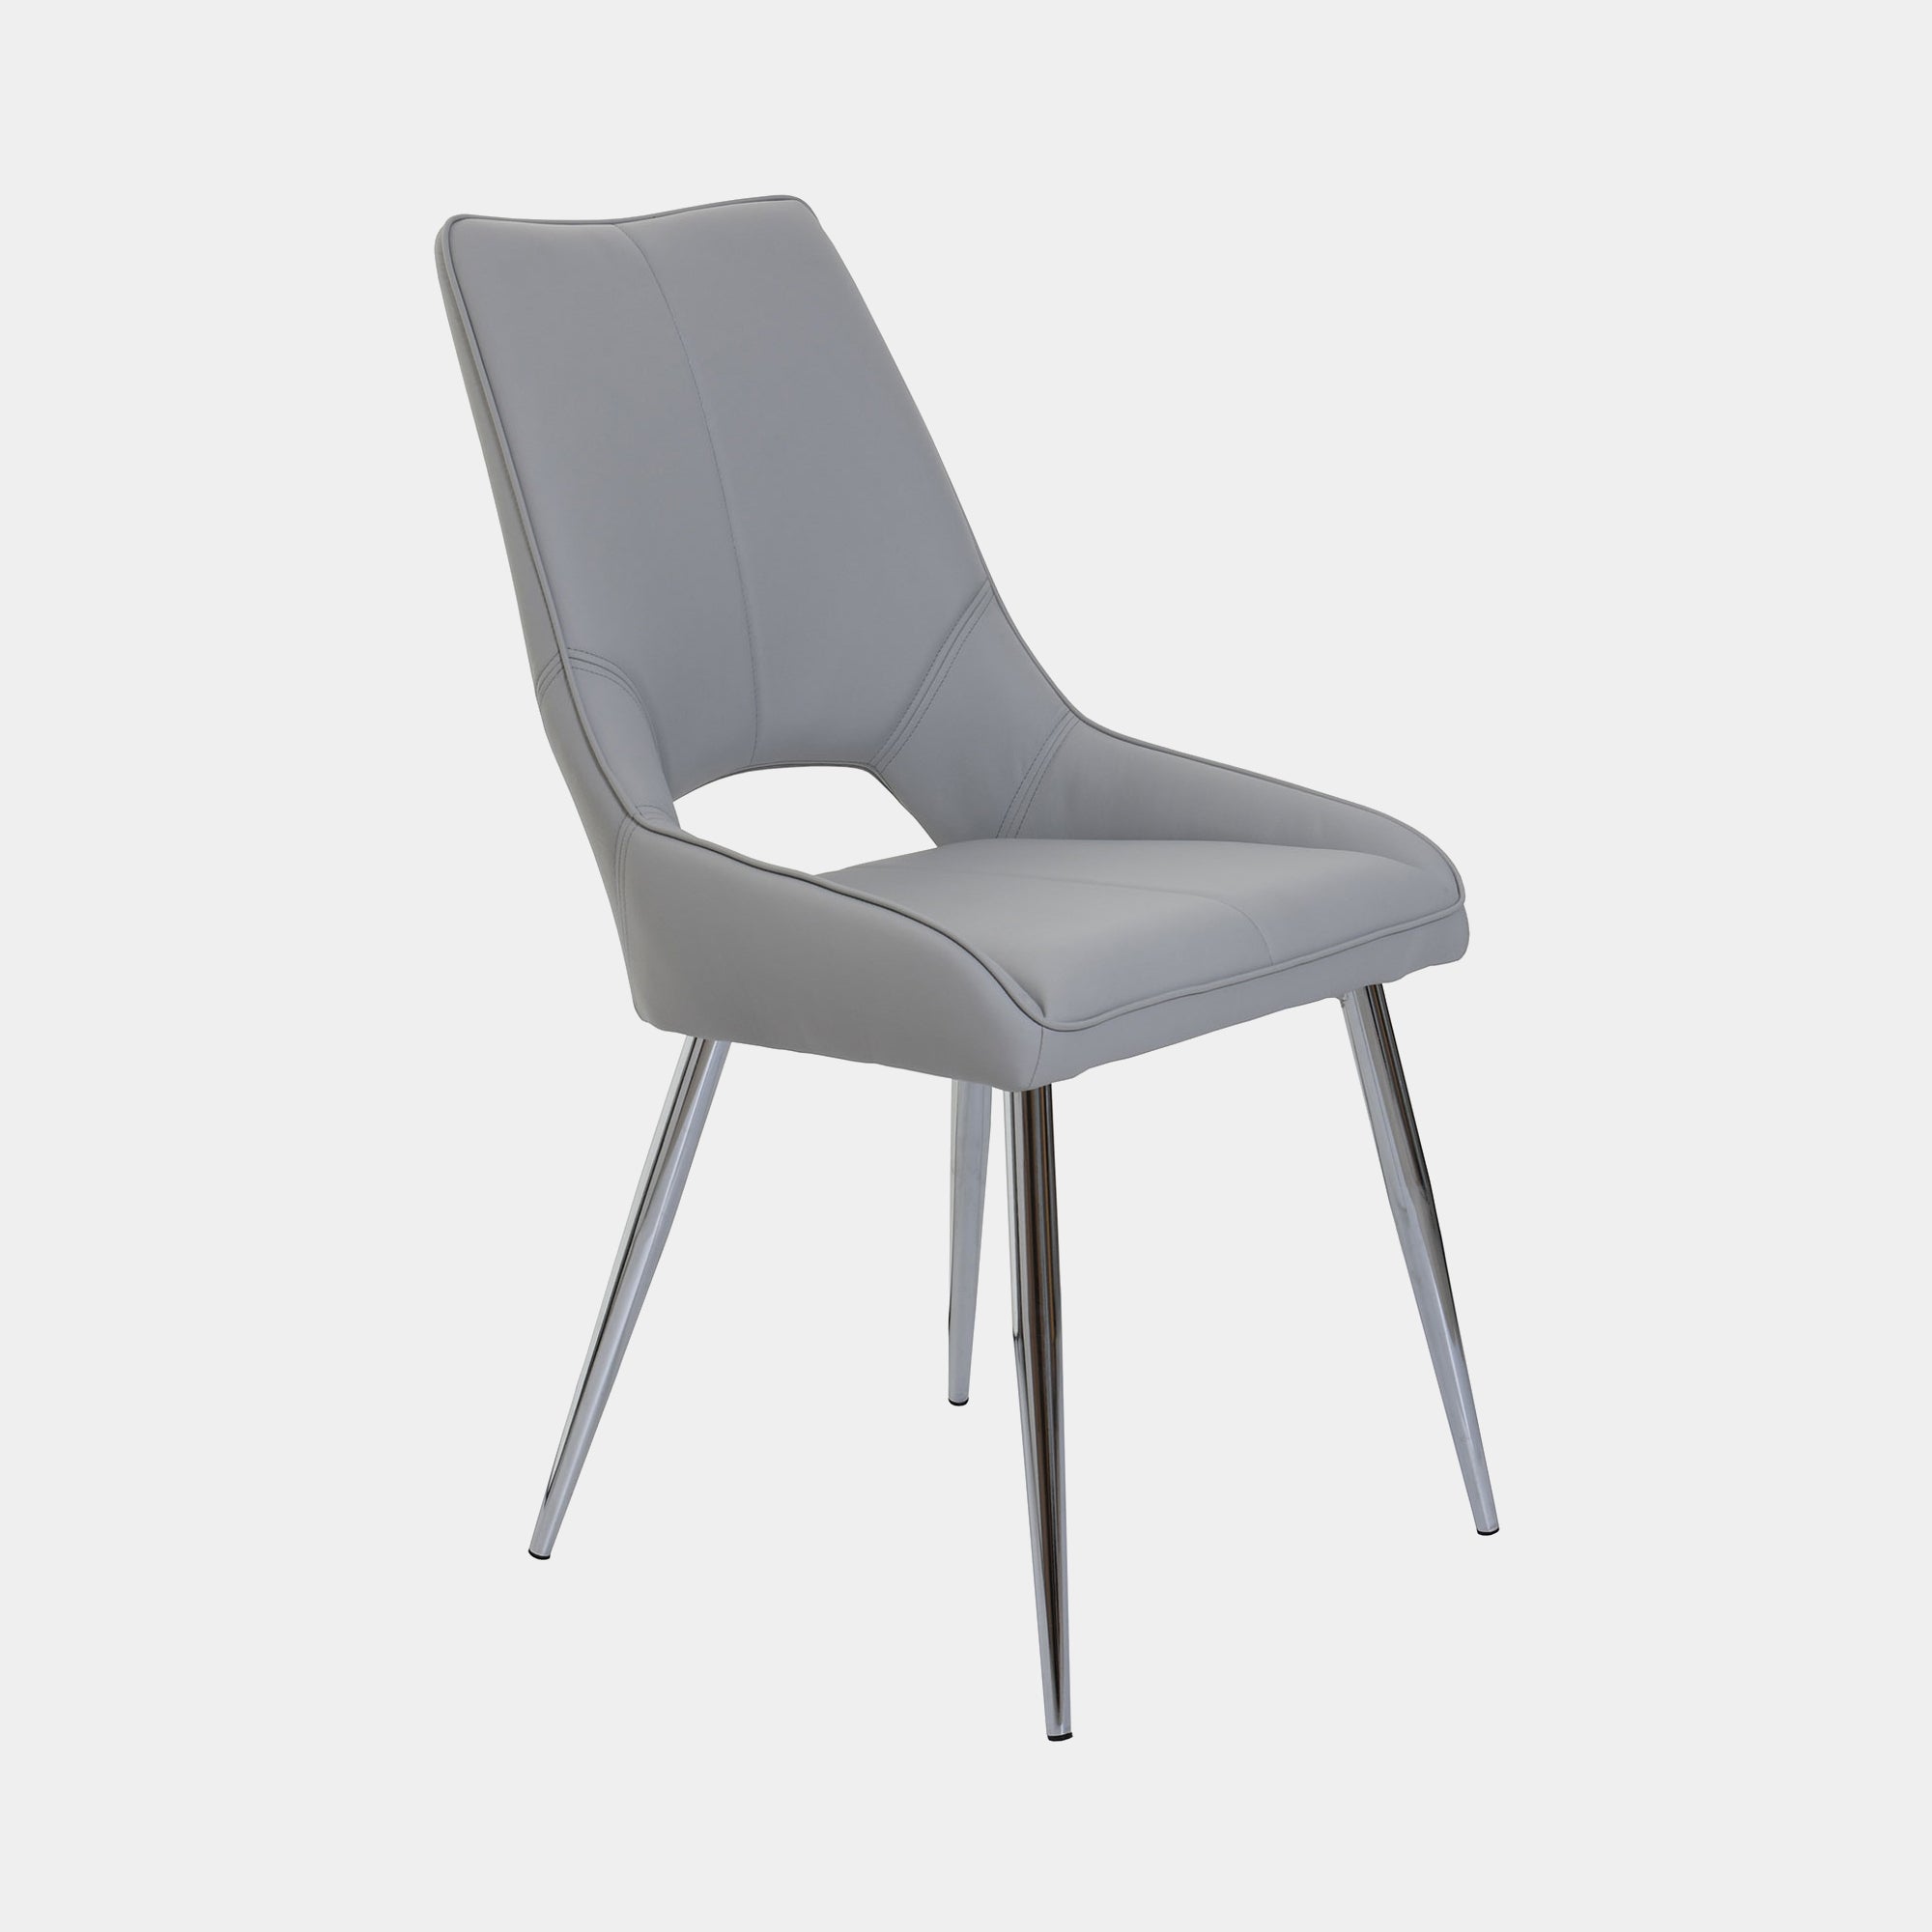 Marco - Dining Chair In Light Grey PU